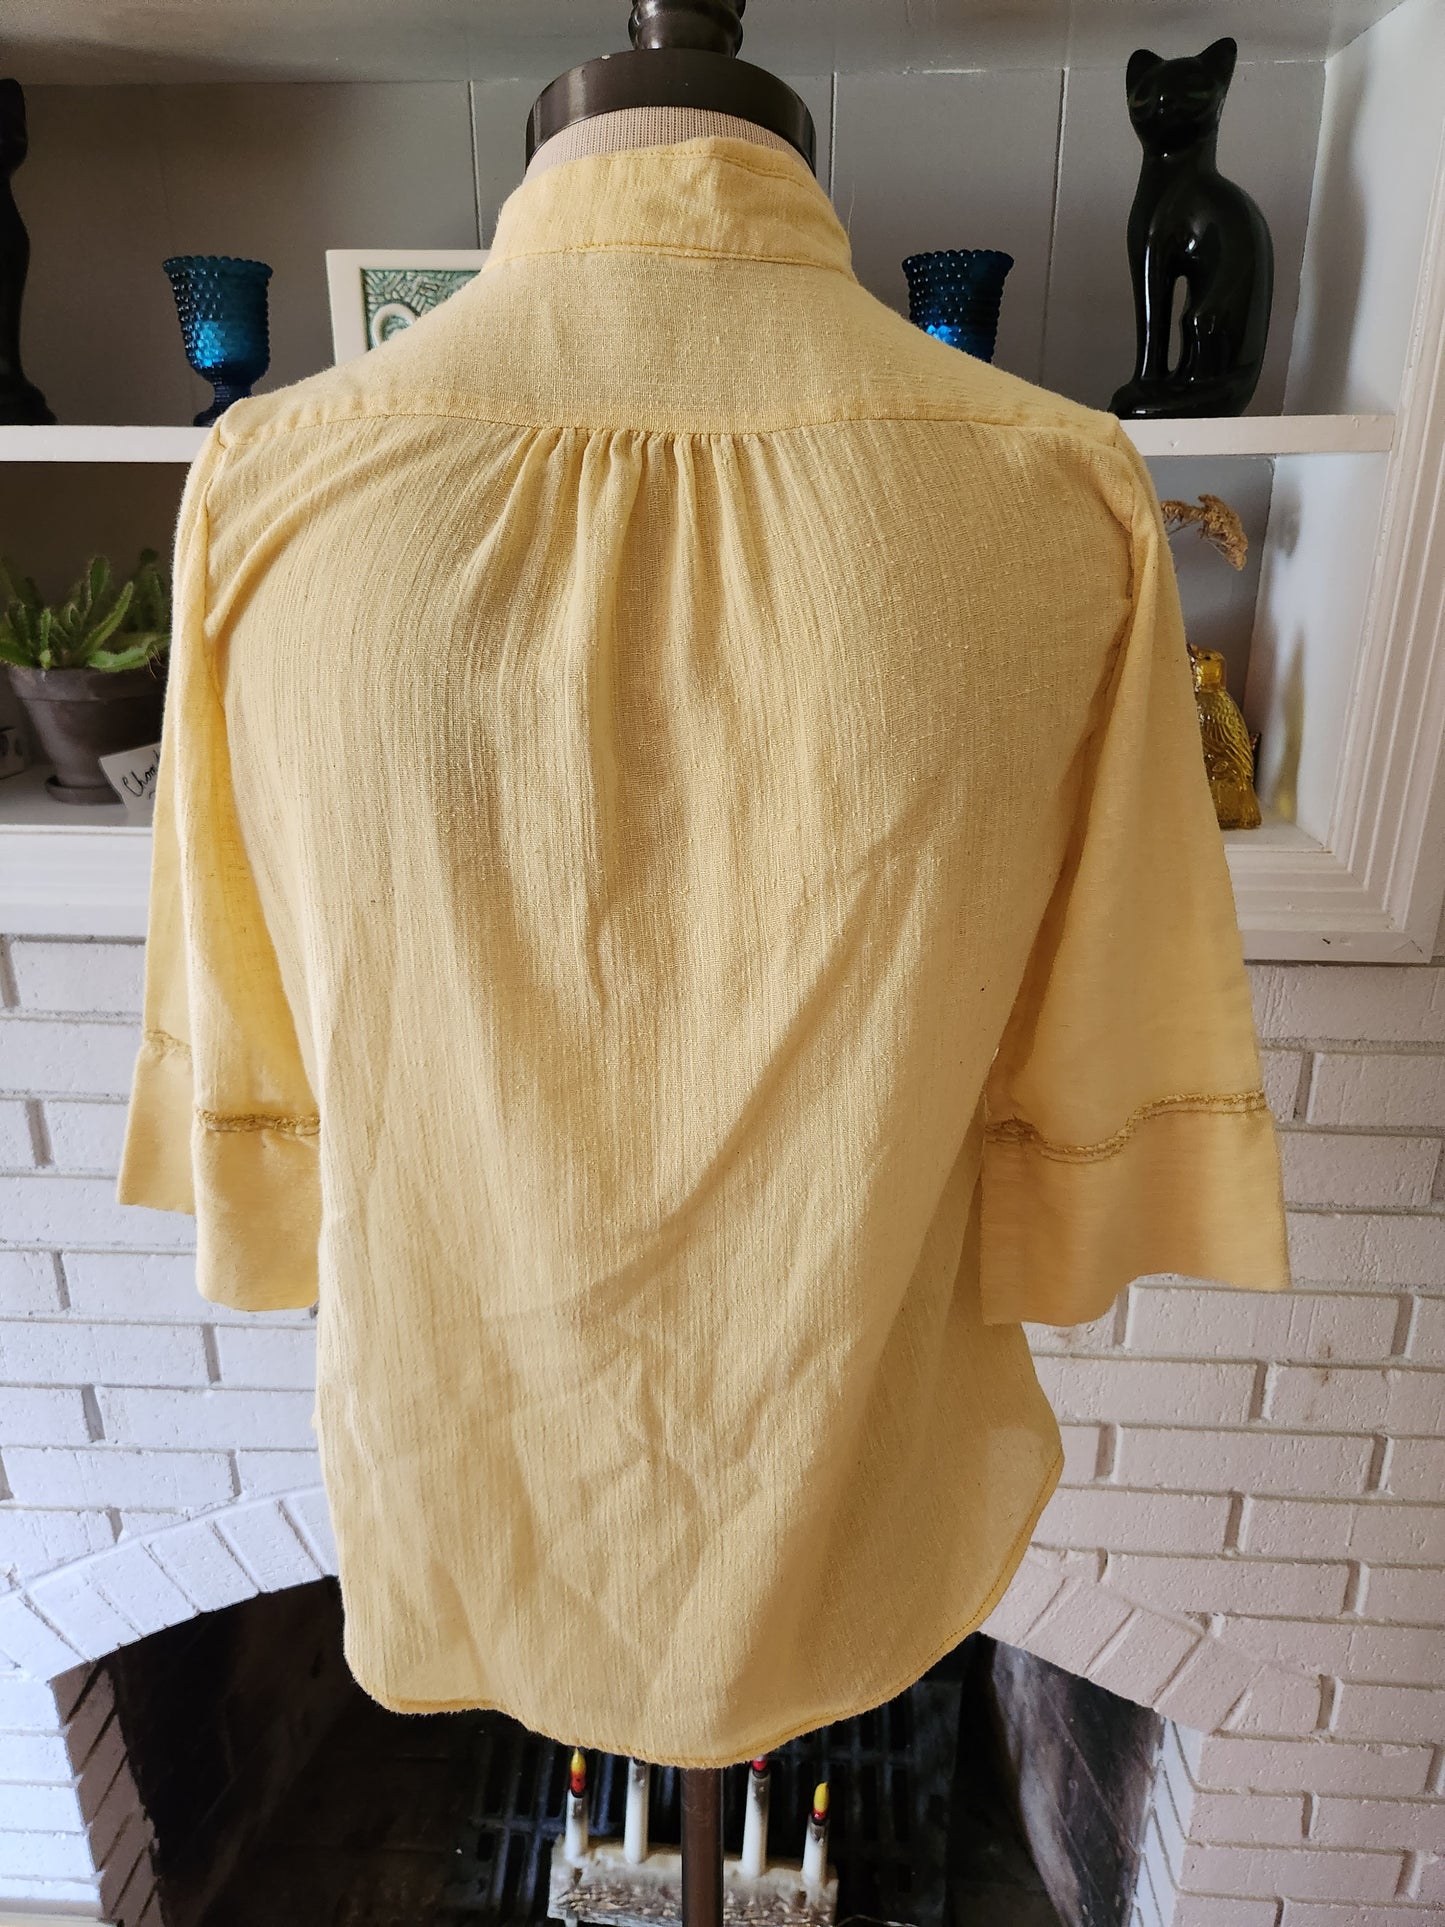 Vintage Short Sleeve Yellow Blouse by Casey's Place